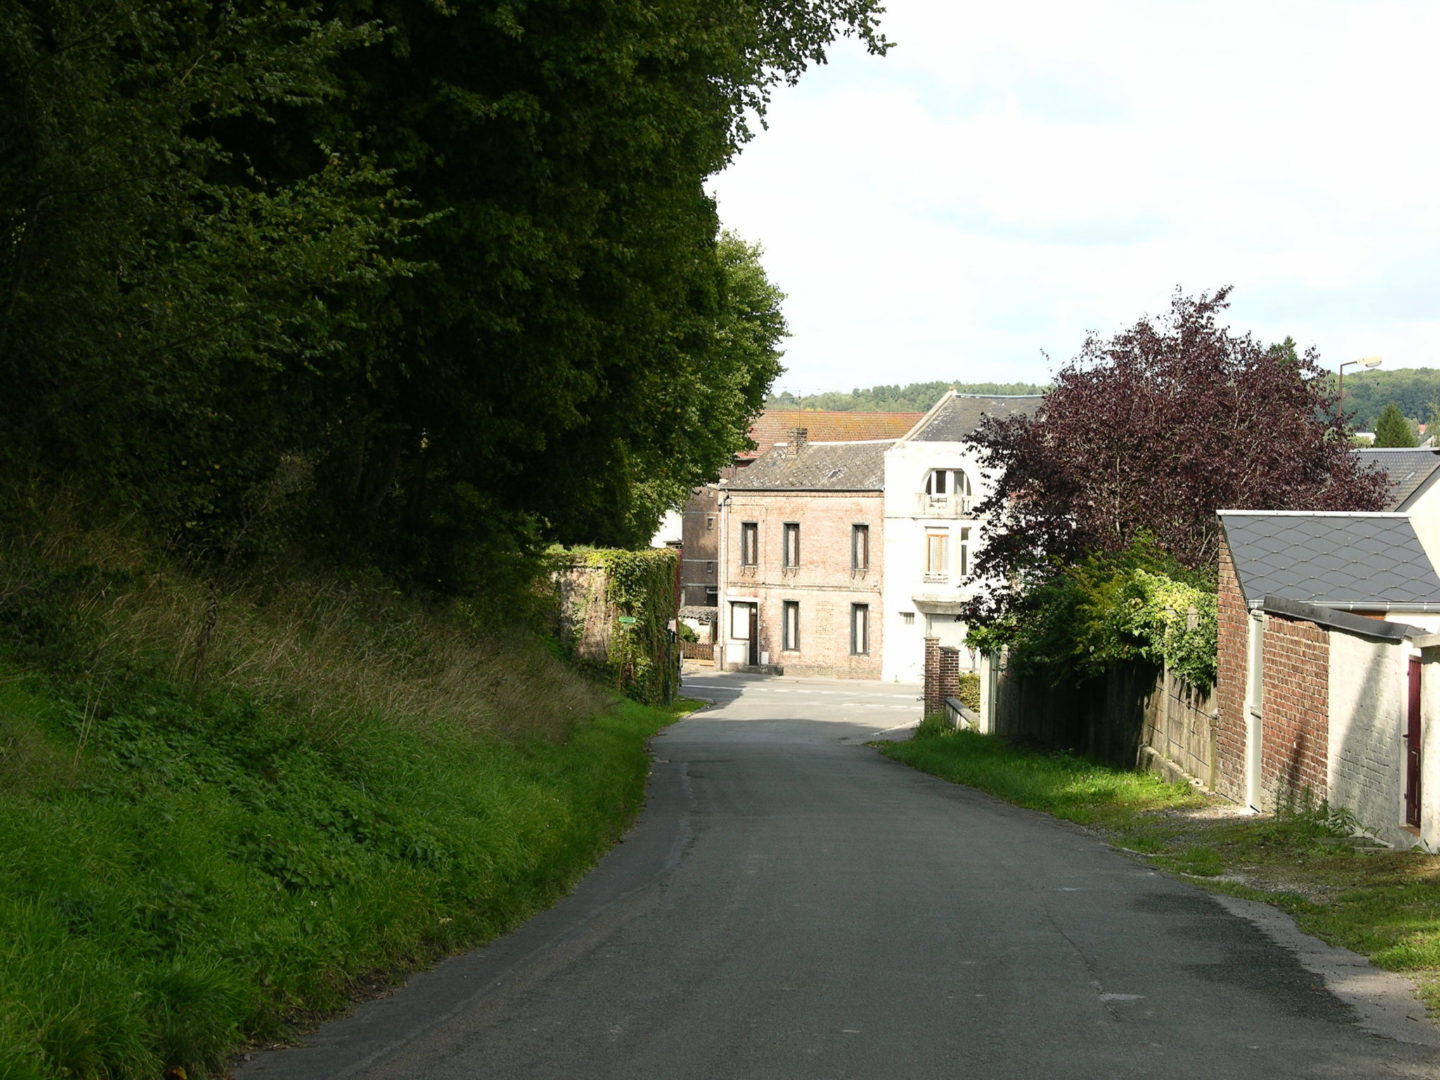 Chemin de Ronde leading down from Guise Chateau (rear)